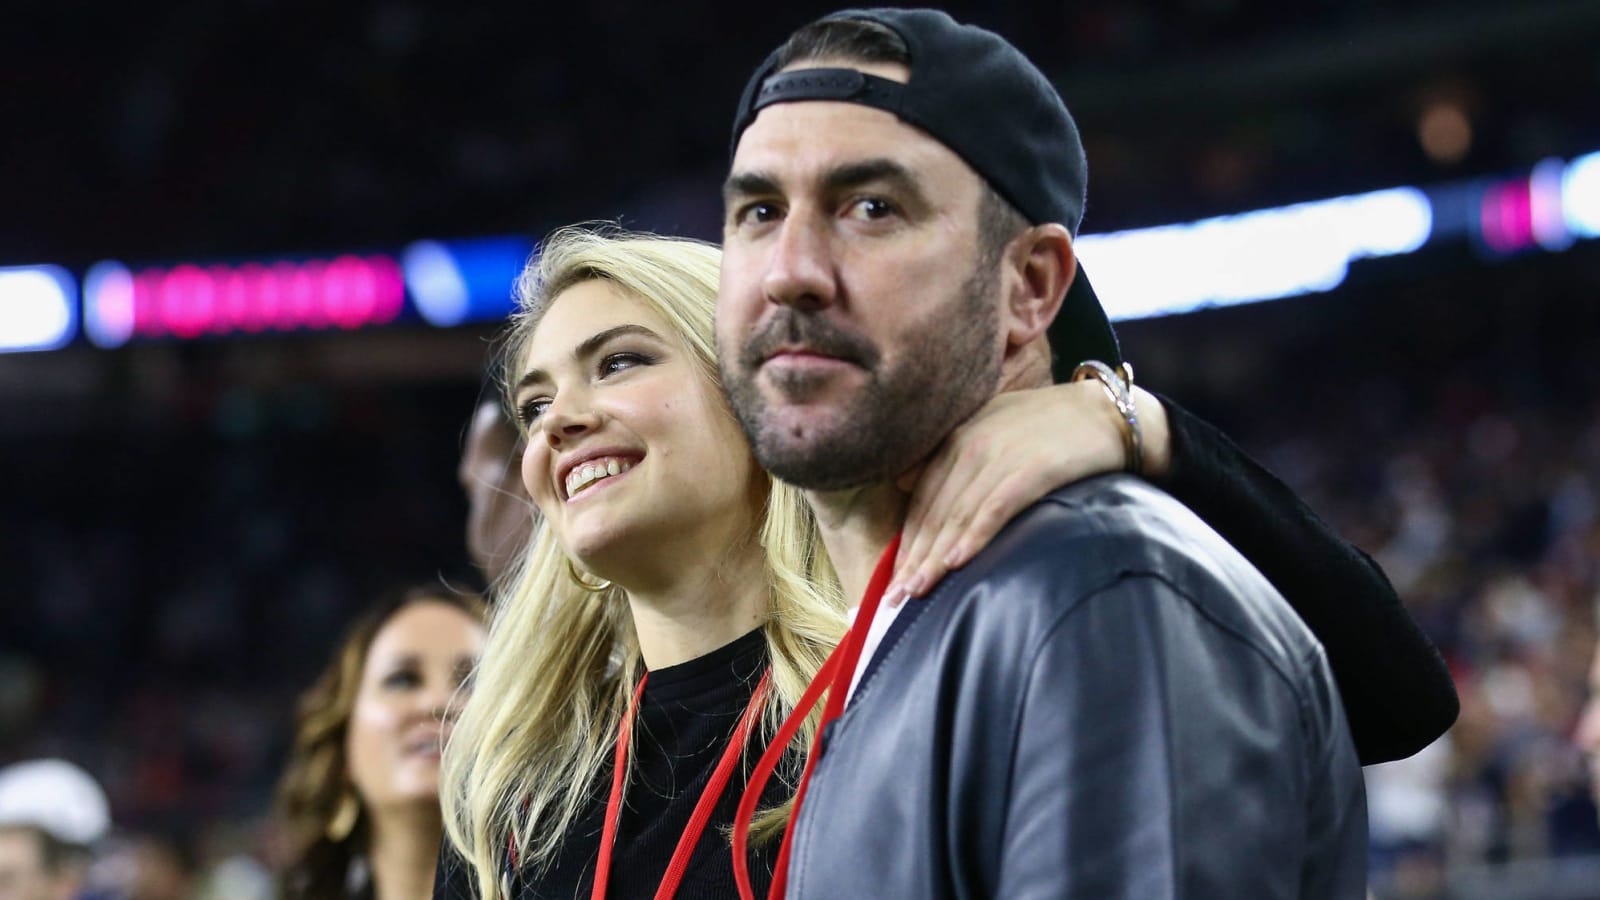 Justin Verlander ‘forced’ Kate Upton to watch his 2007 no-hitter on Opening Day